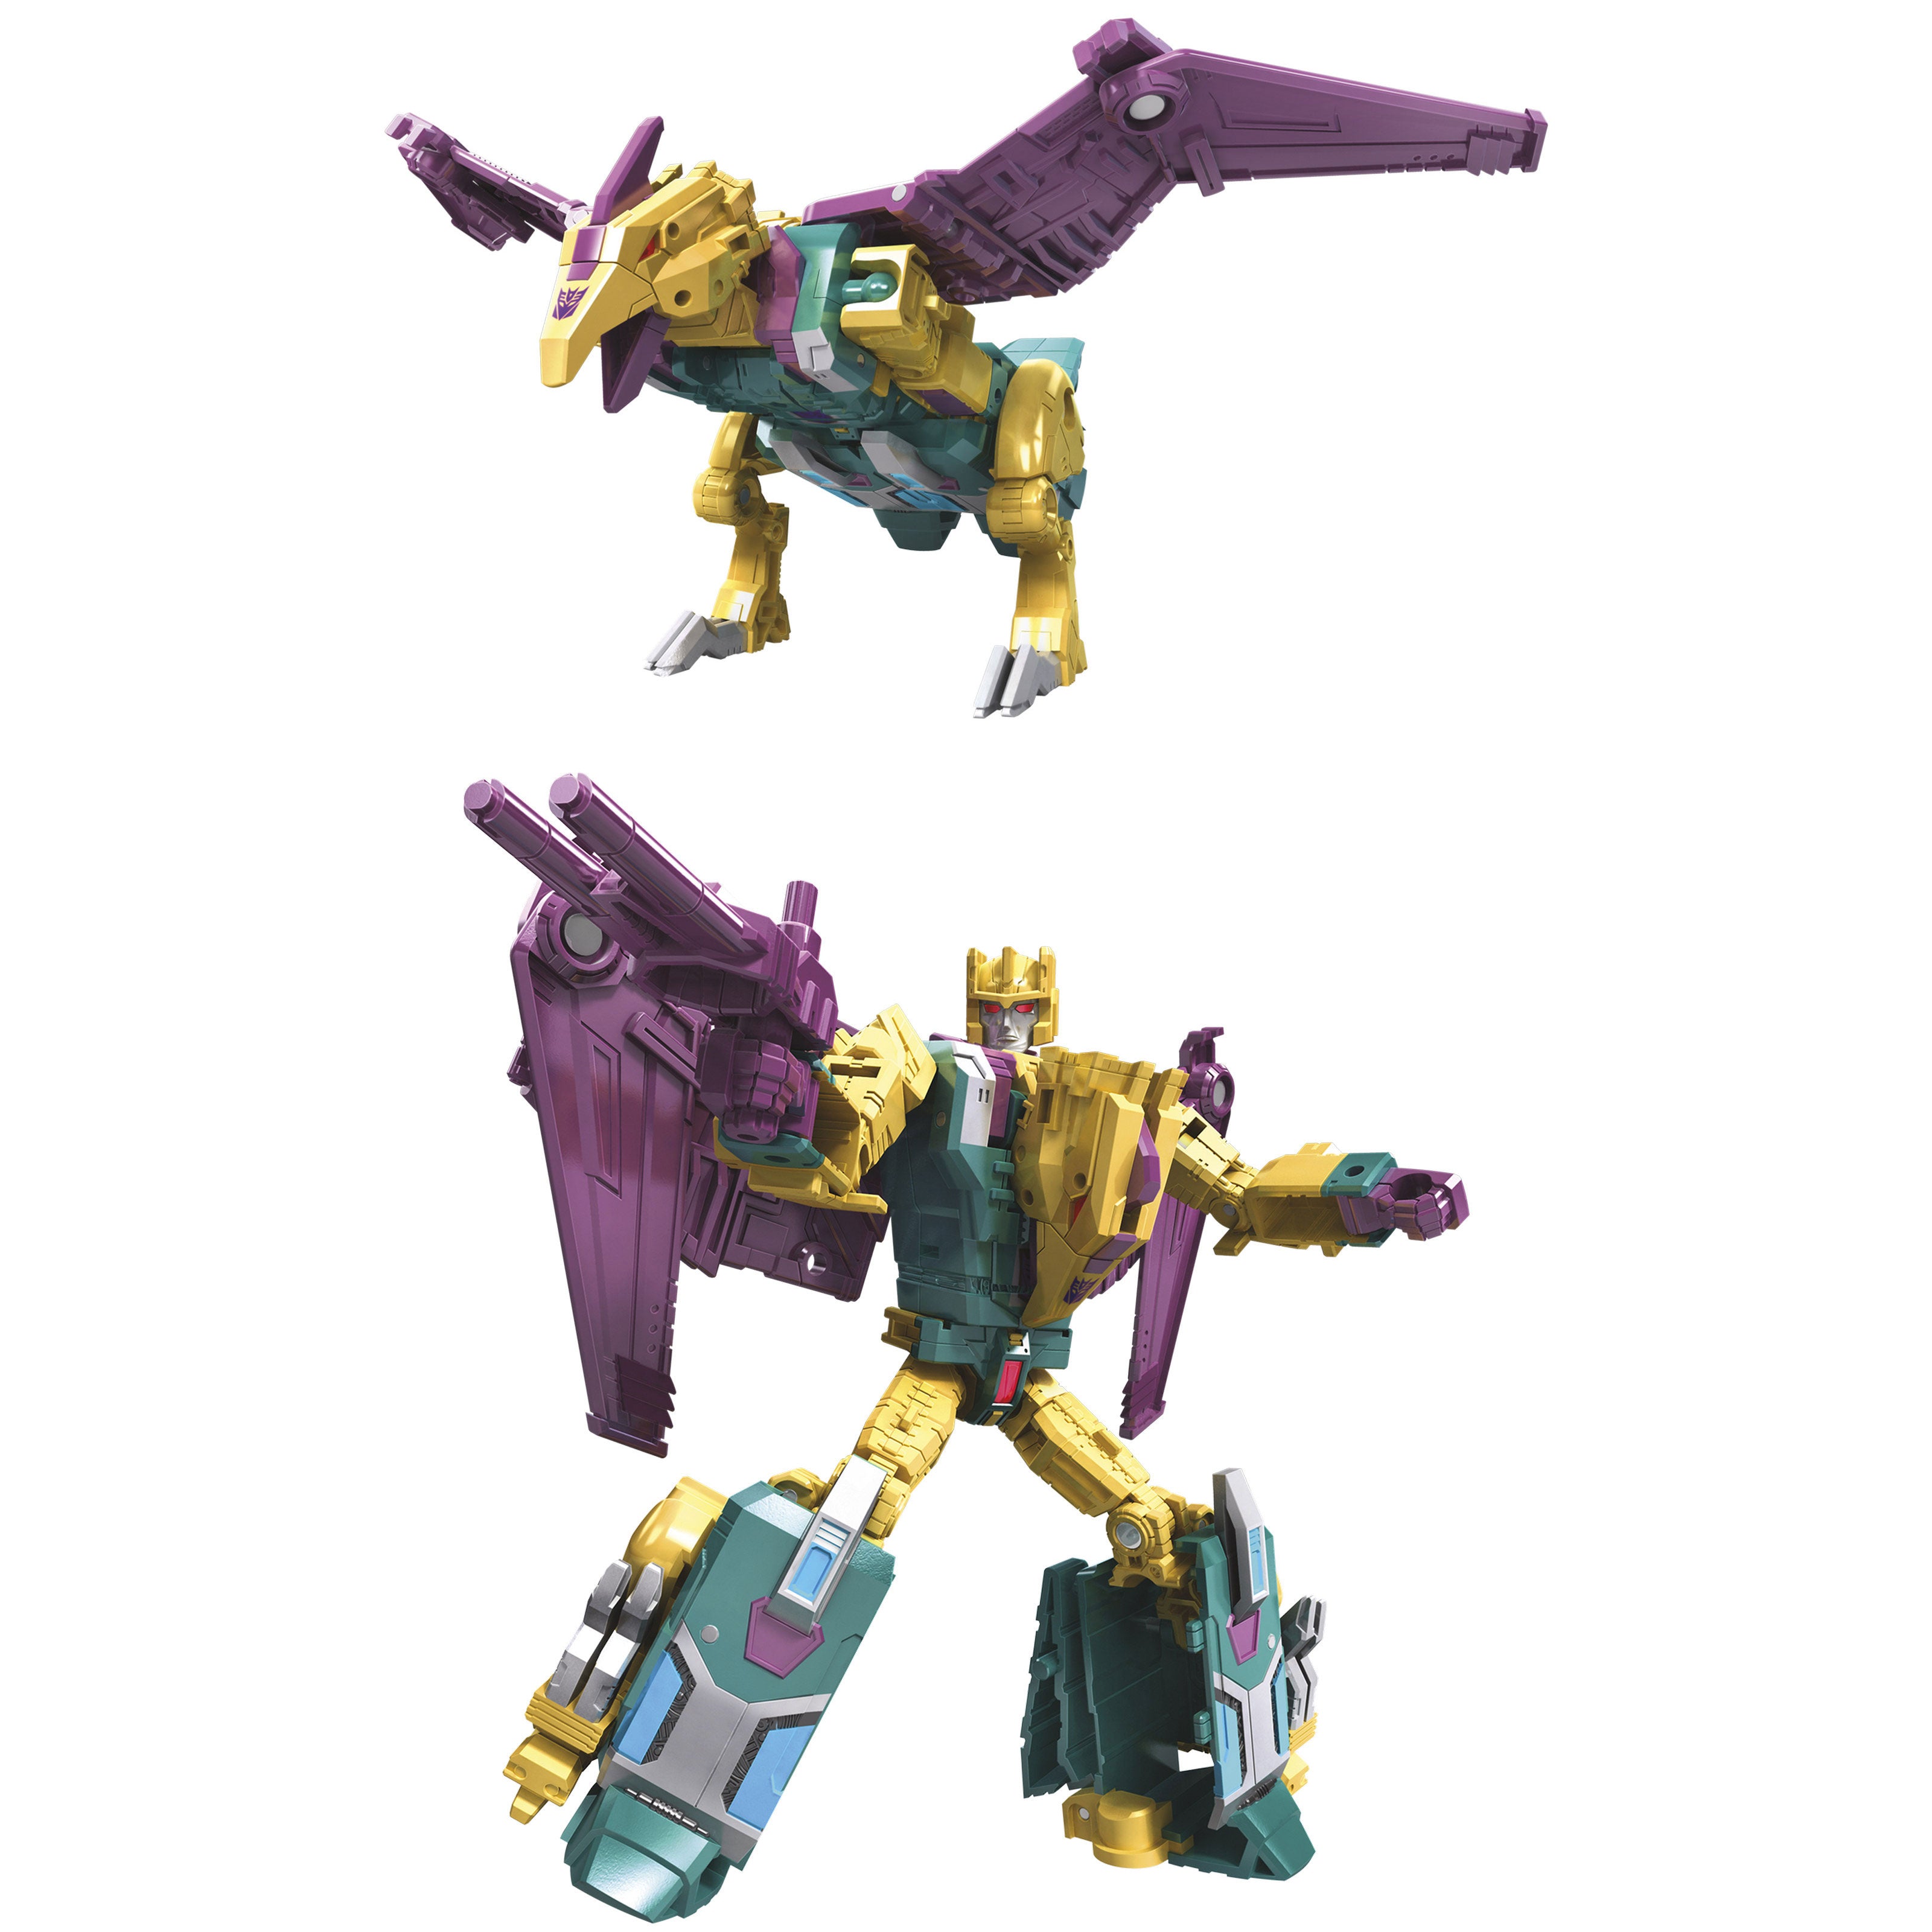 Hasbro - Transformers Generations - Power of the Primes - Deluxe Wave - Sinnertwin, Terrorcon Blot, Terrorcon Cutthroat (Set of 3) - Marvelous Toys